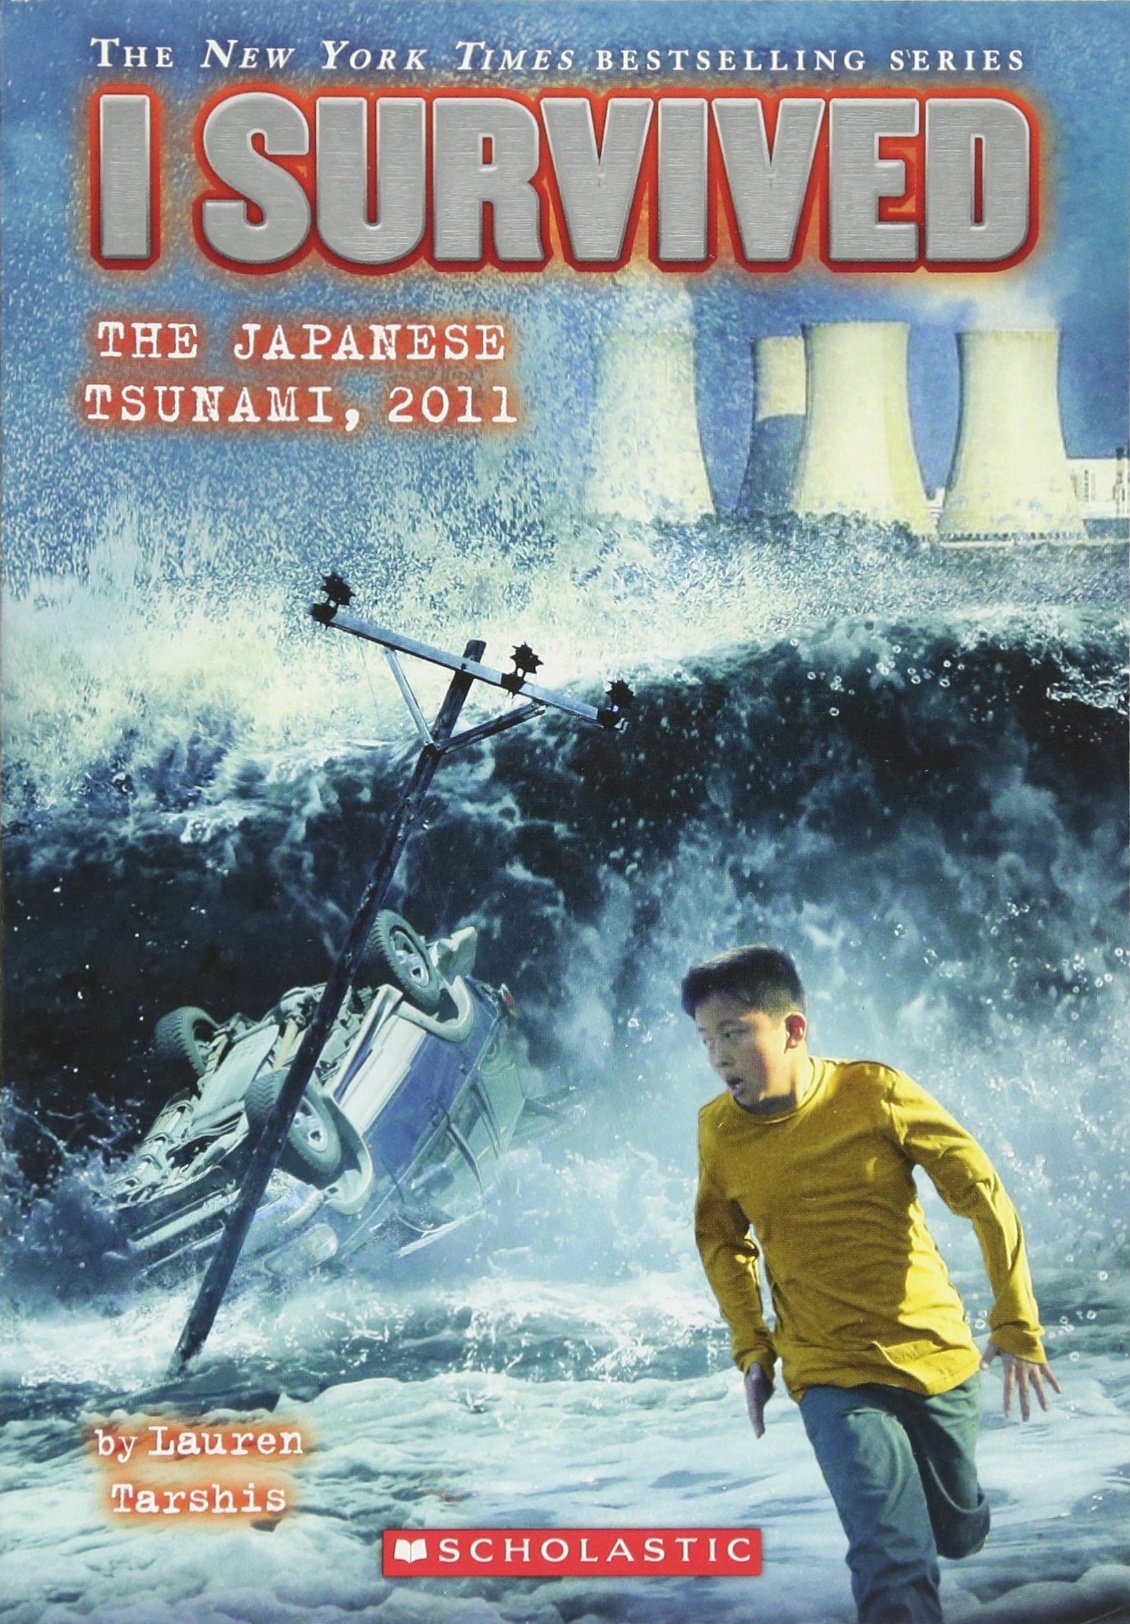 I Survived Book Covers The Japanese Tsunami, 2011